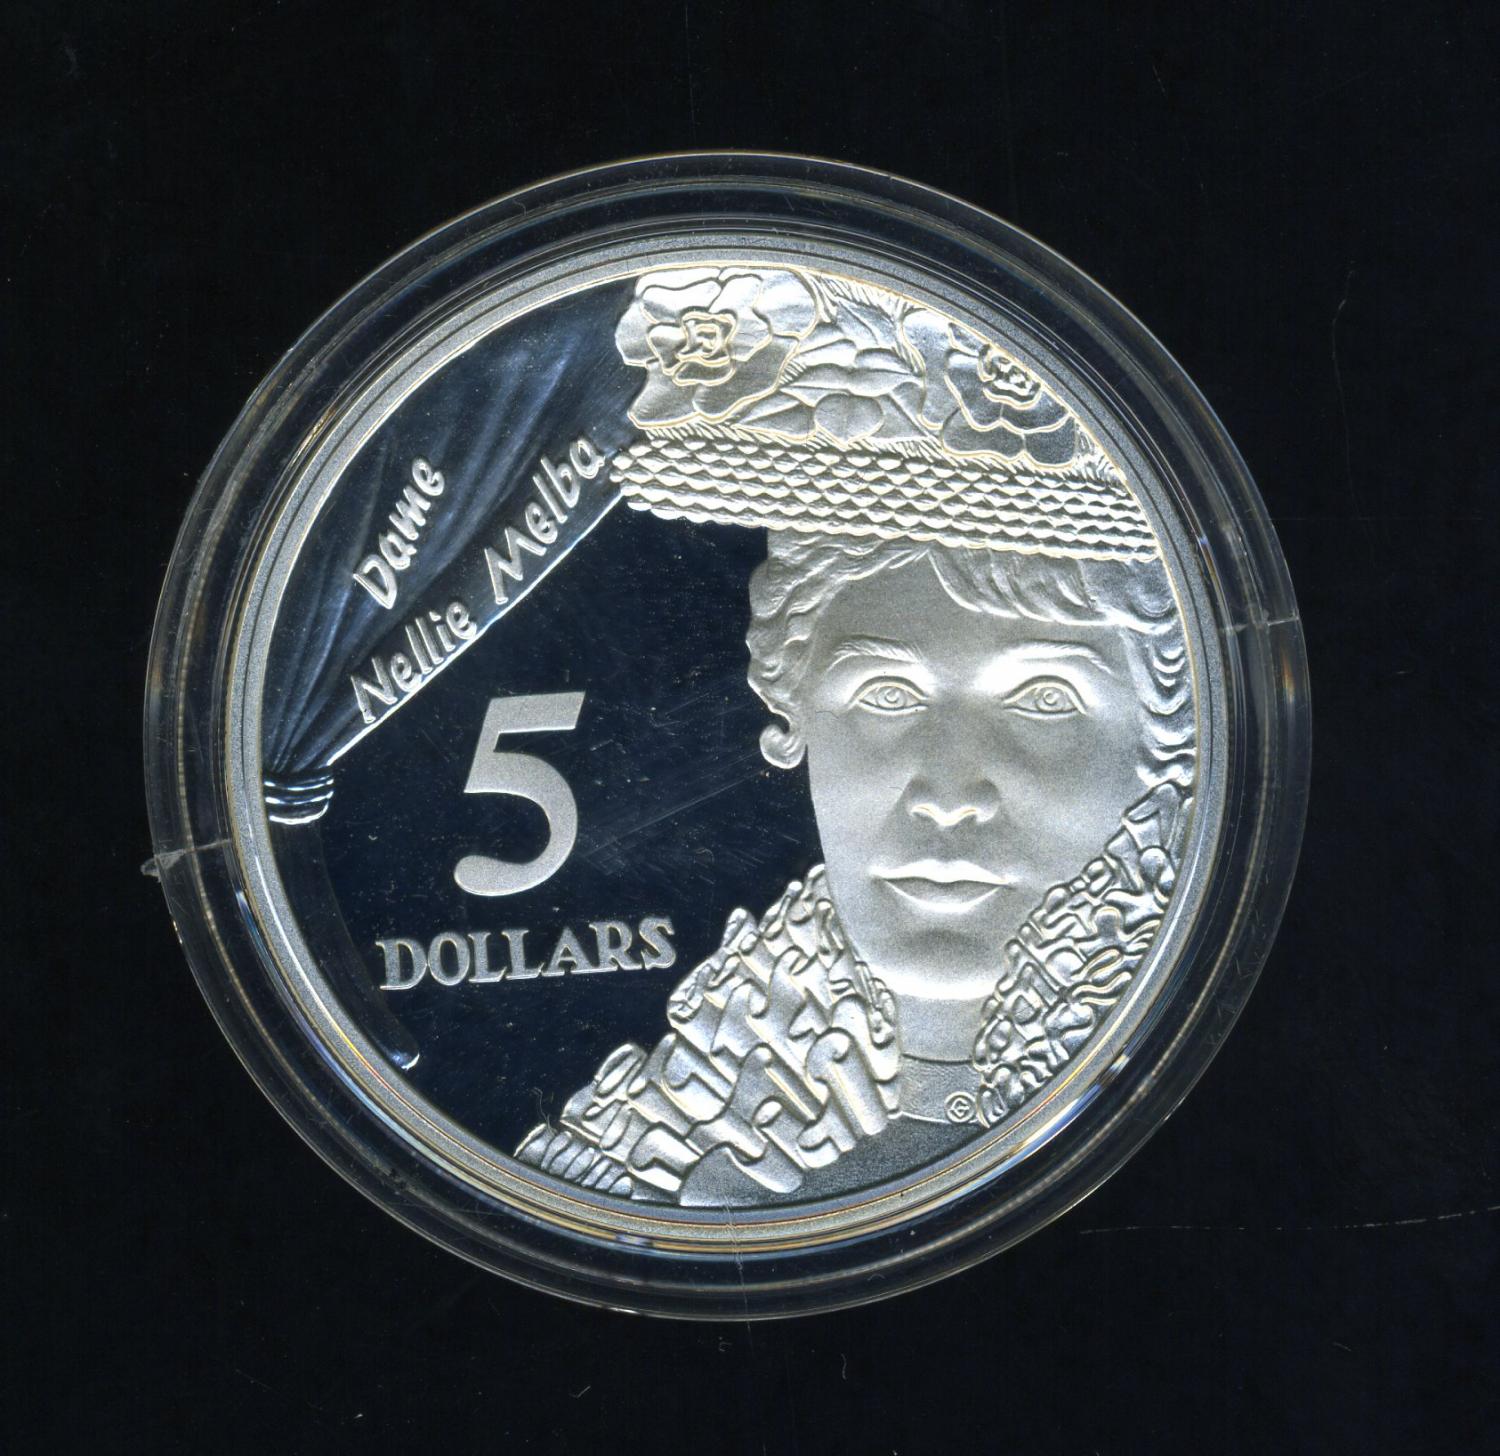 Thumbnail for 1996 Australian $5 Silver Coin From Masterpieces Set - Dame Nellie Melba.  The Coin is Sterling Silver and contains over 1oz of Pure Silver.